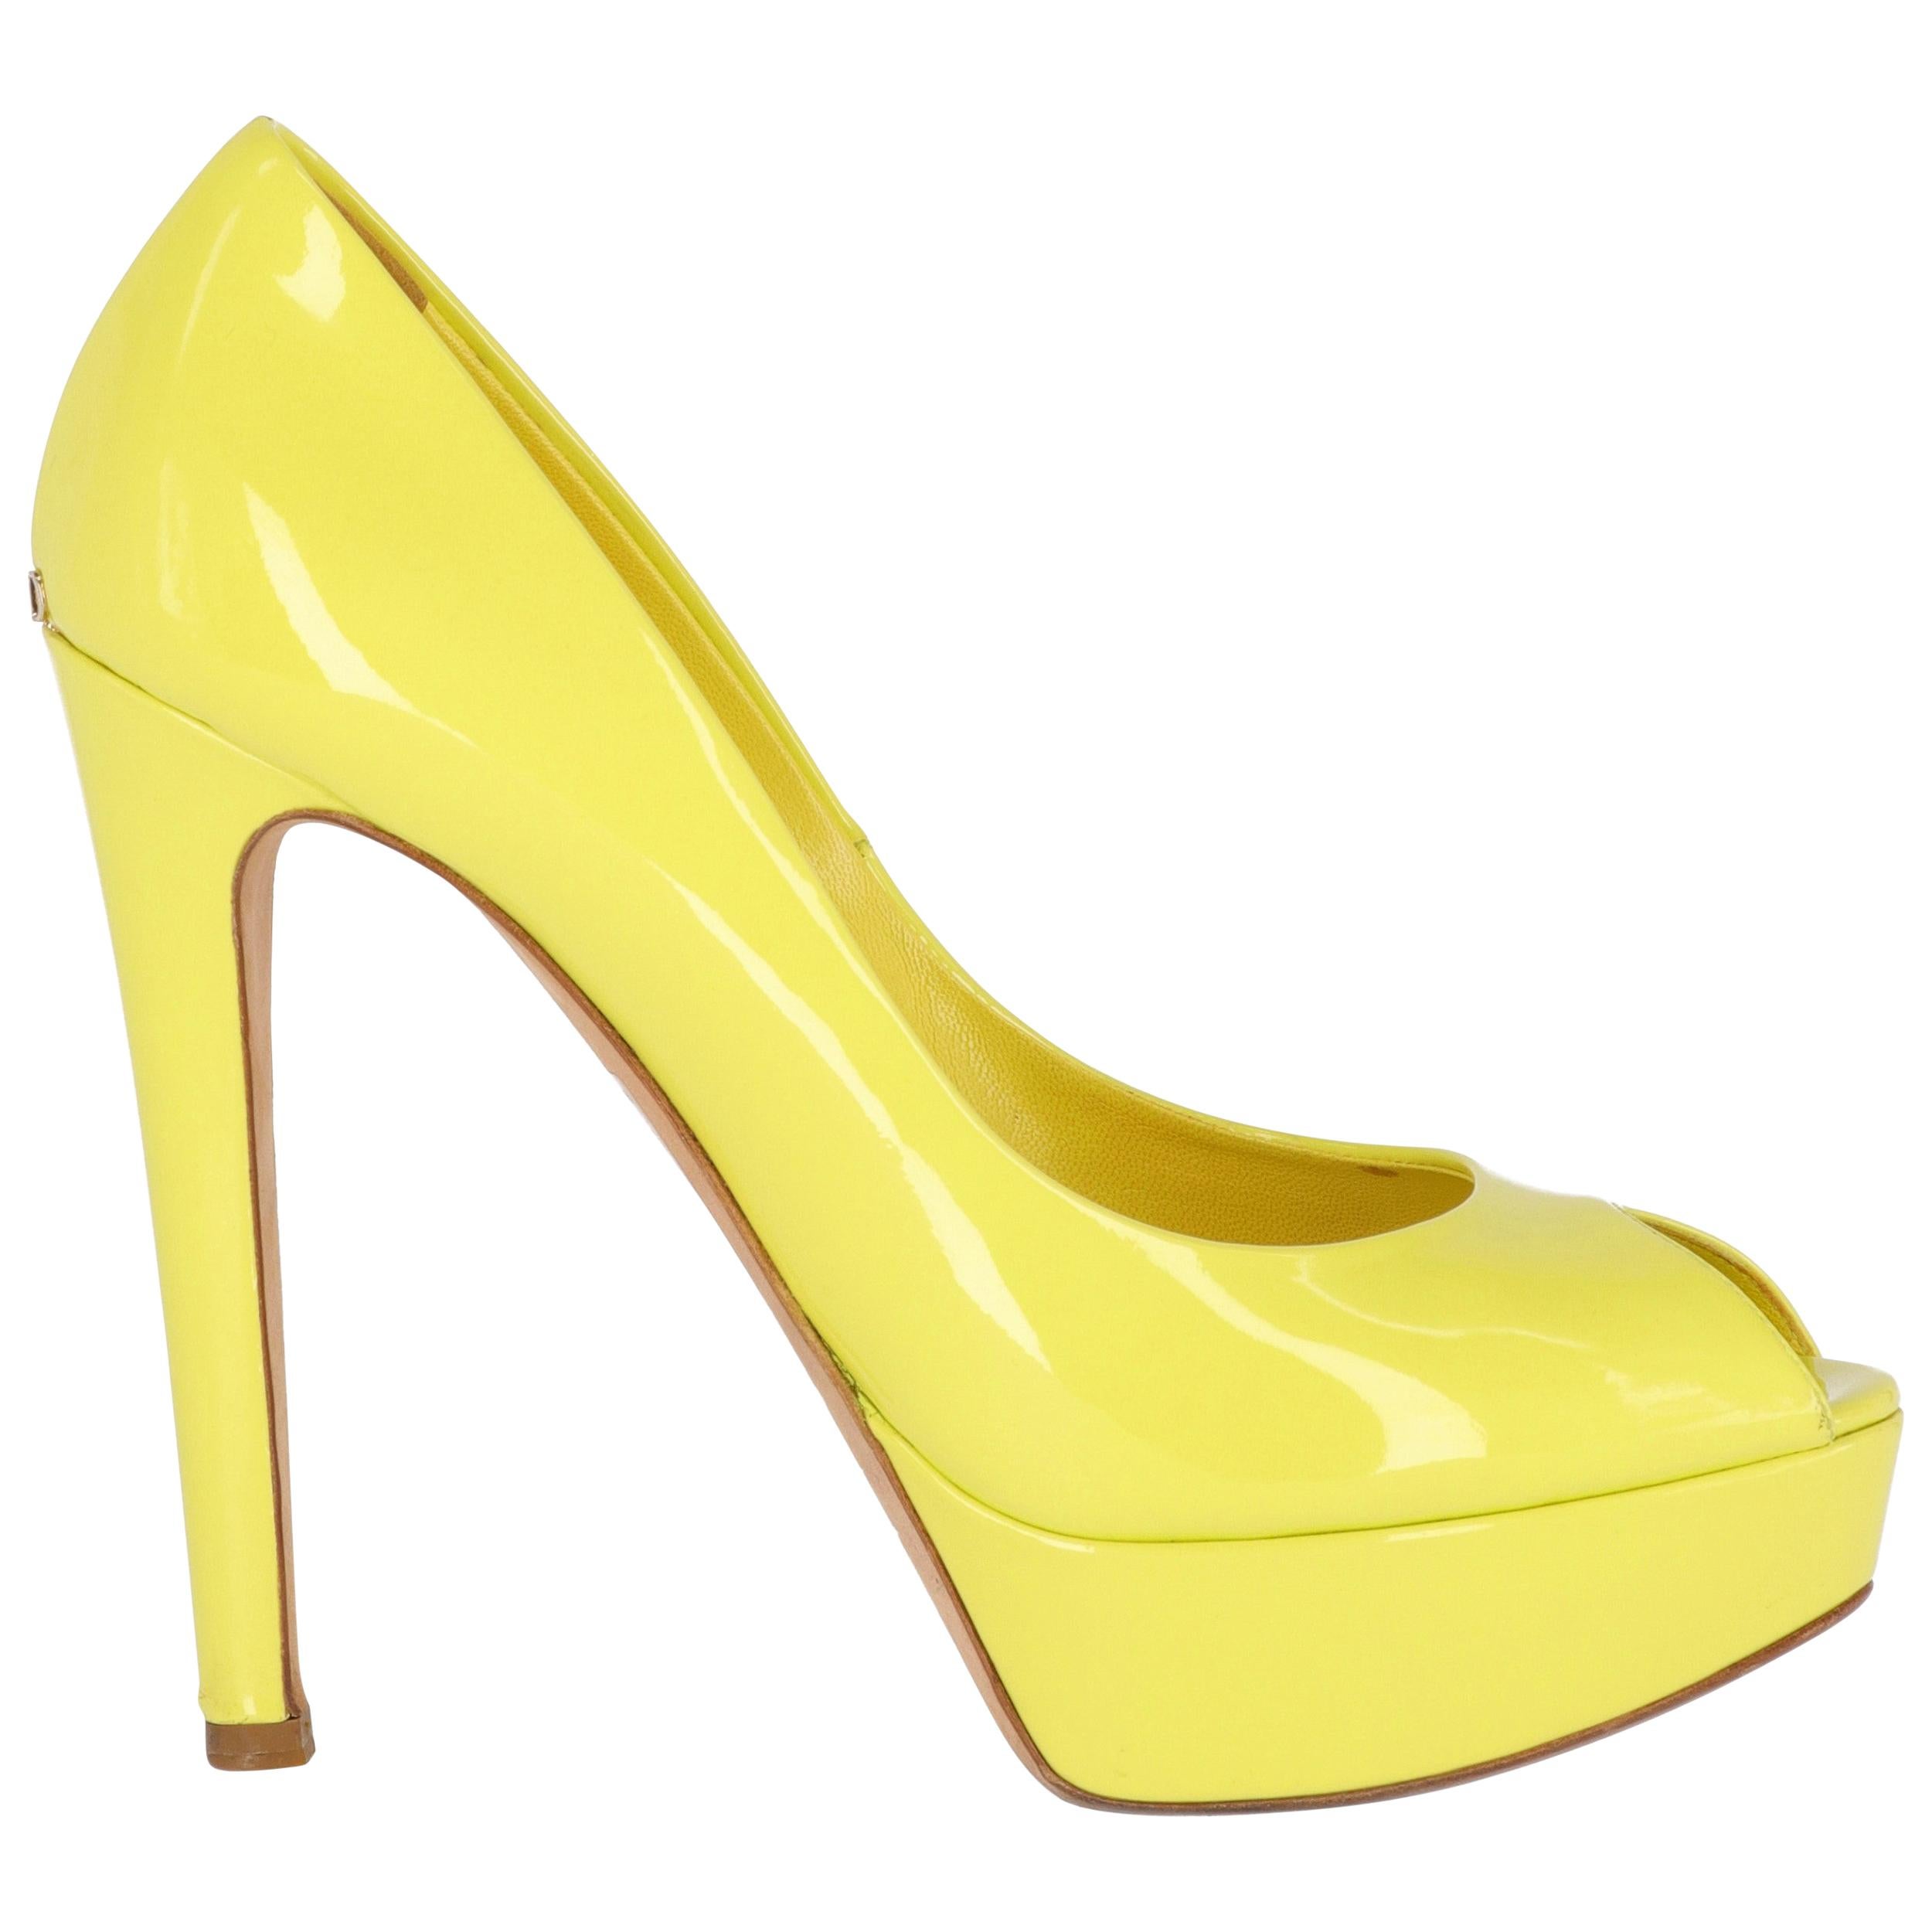 2000s Dior Yellow Lemon Patent Leather Heels Shoes